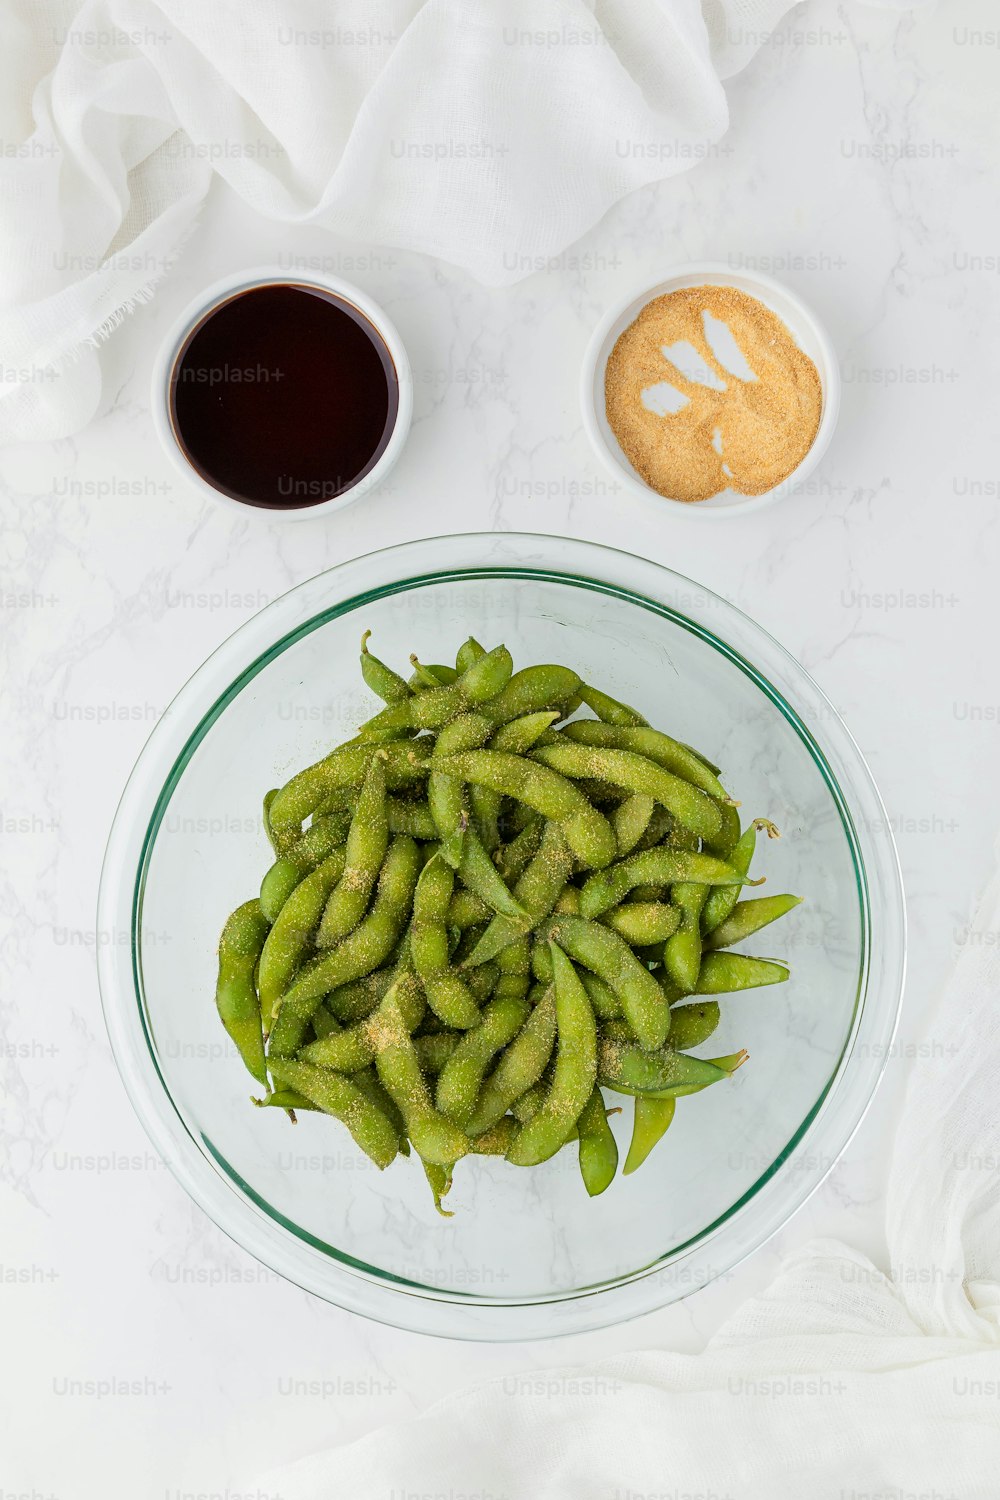 a plate of green beans next to a cup of coffee